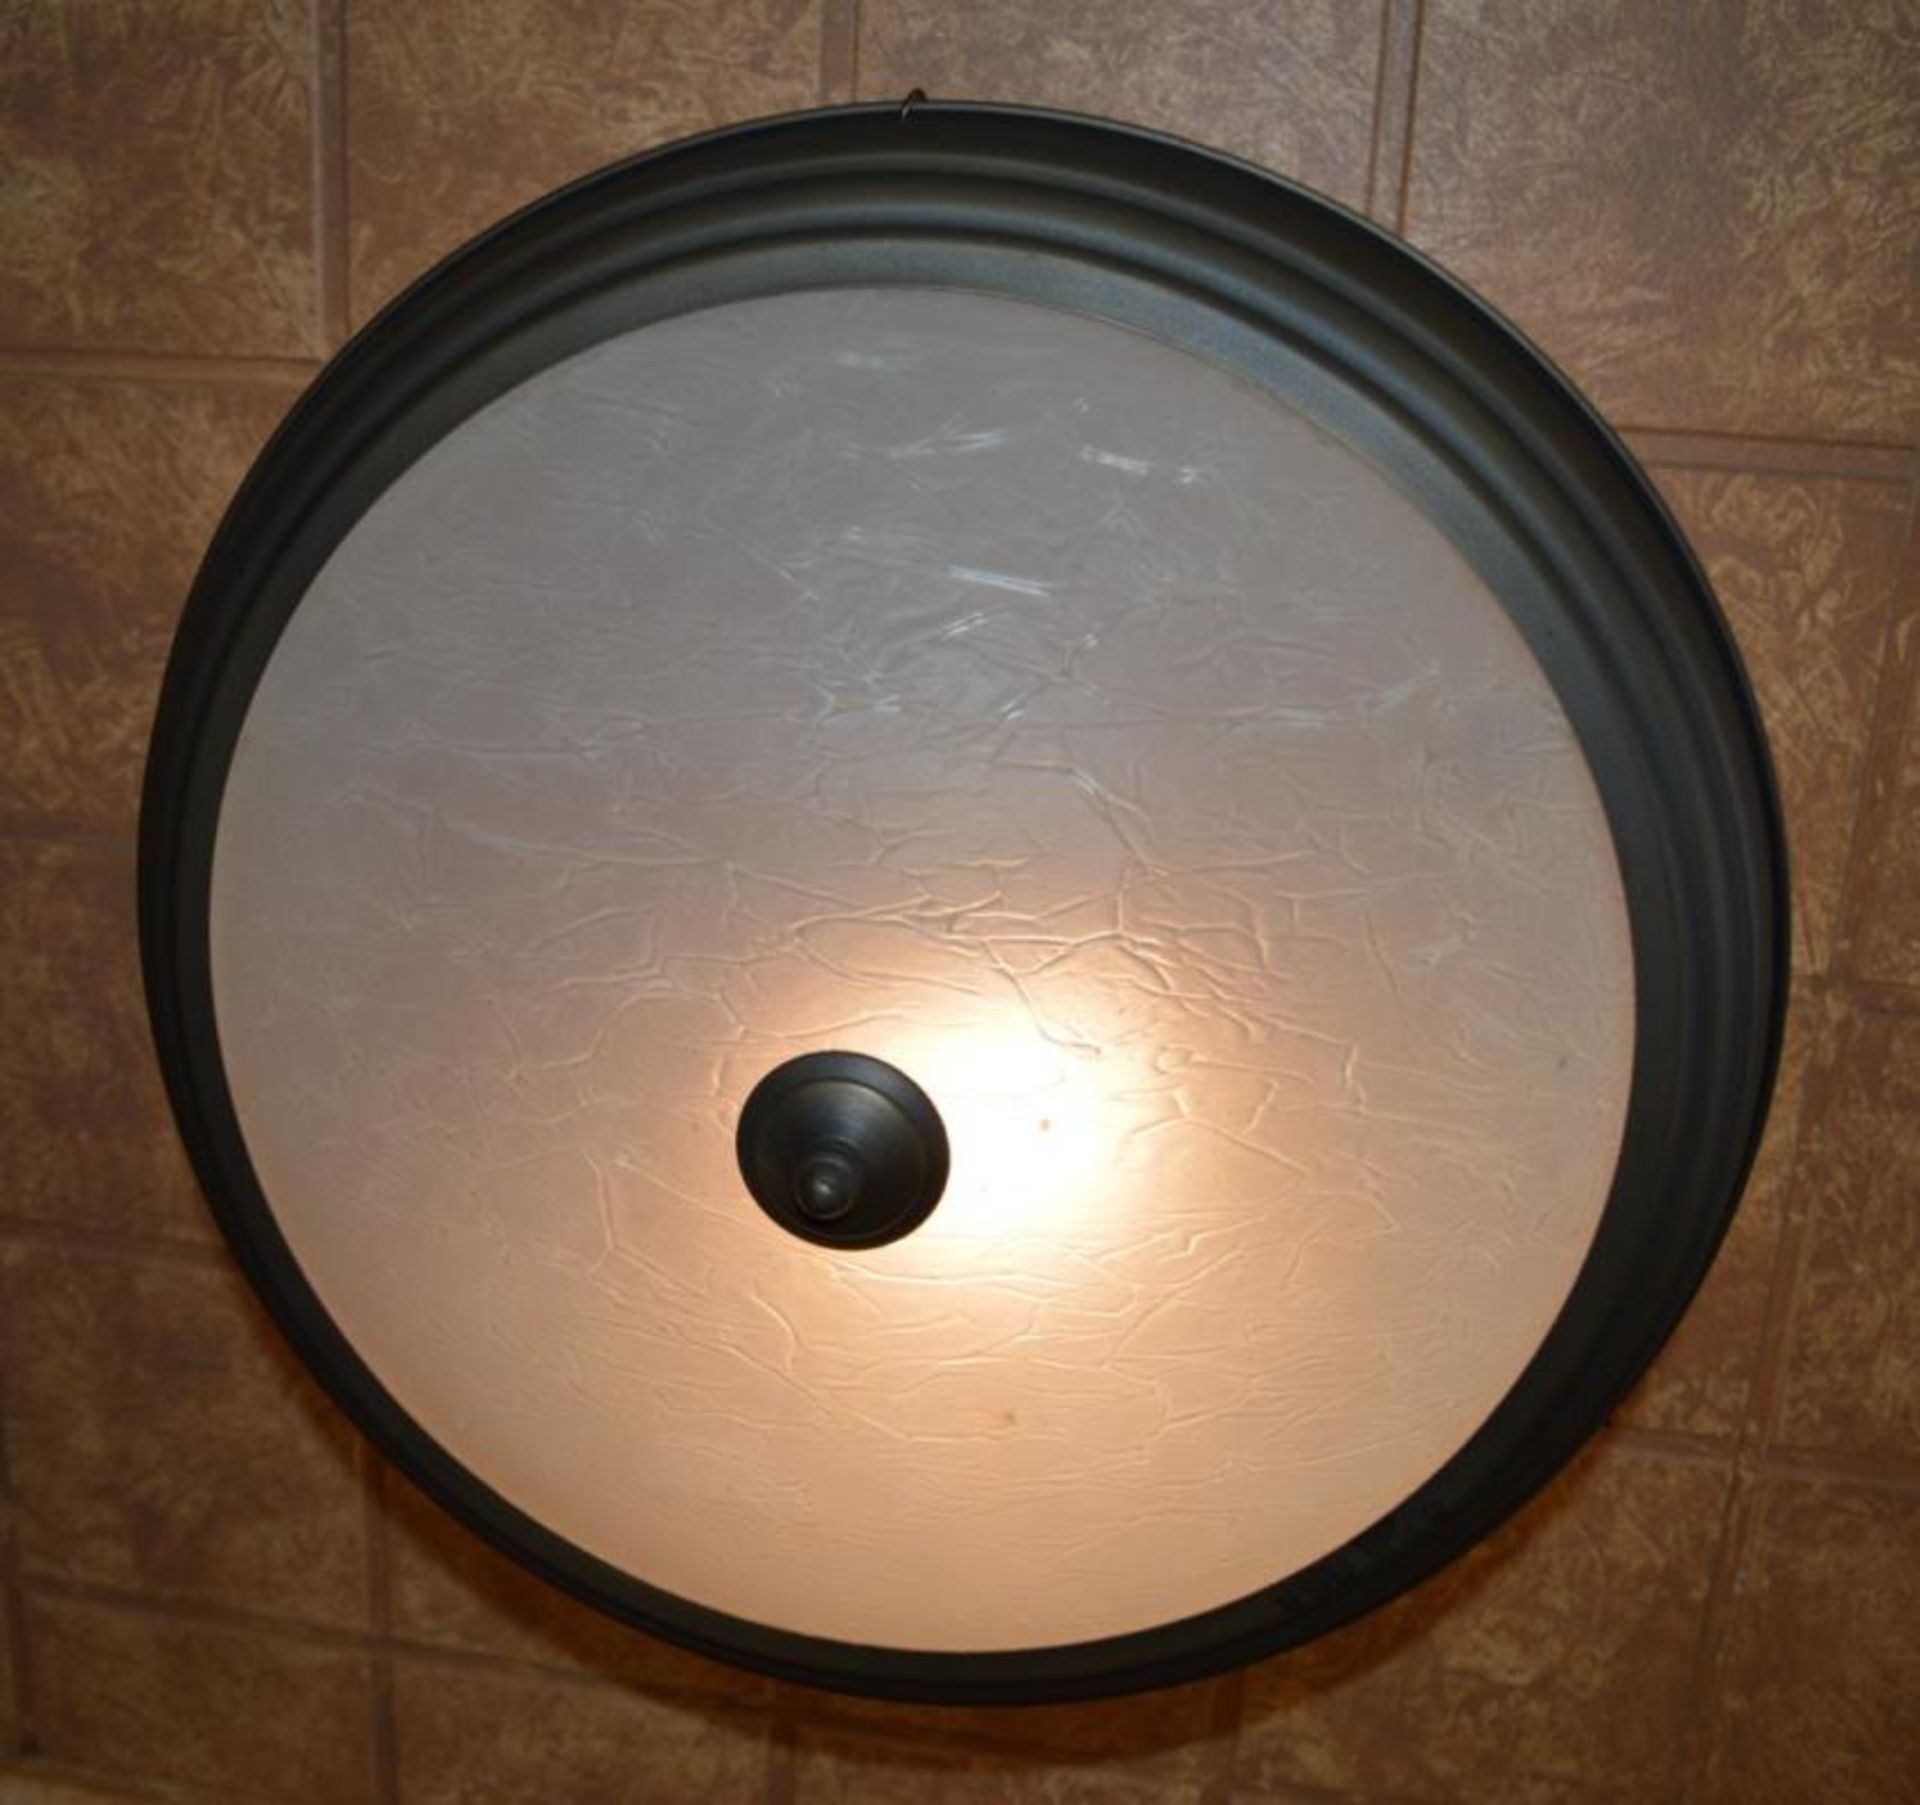 8 x Suspended Round Ceiling Lights Matt Frame and Frosted Glass Insert - Diameter 50 cms x Drop 60 c - Image 3 of 3